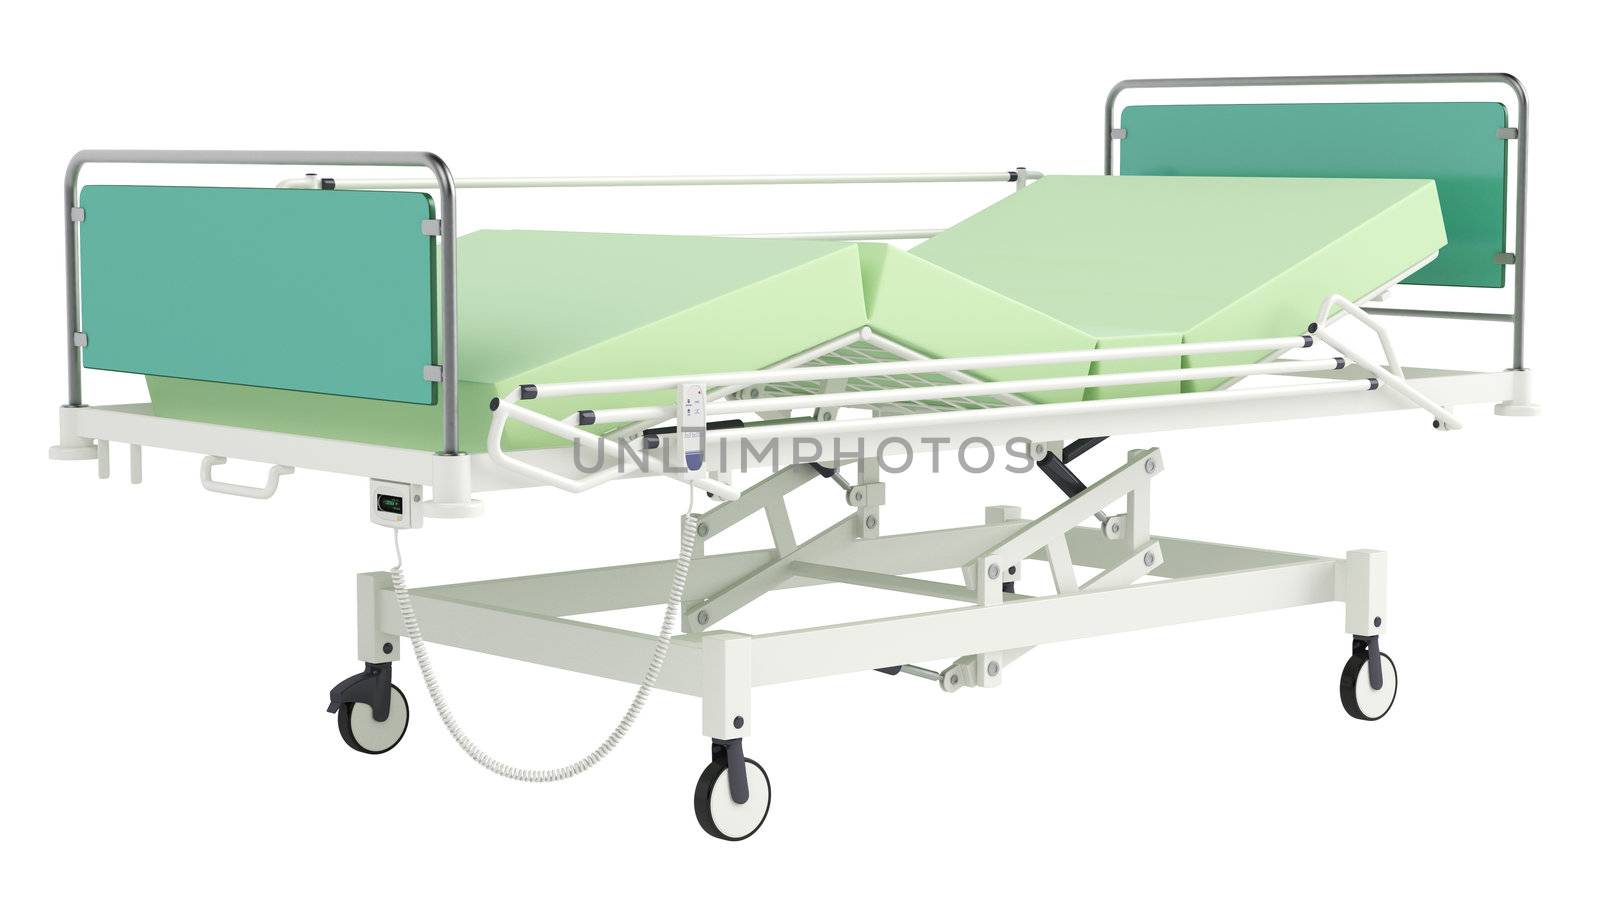 Mobile hospital bed isolated on white background